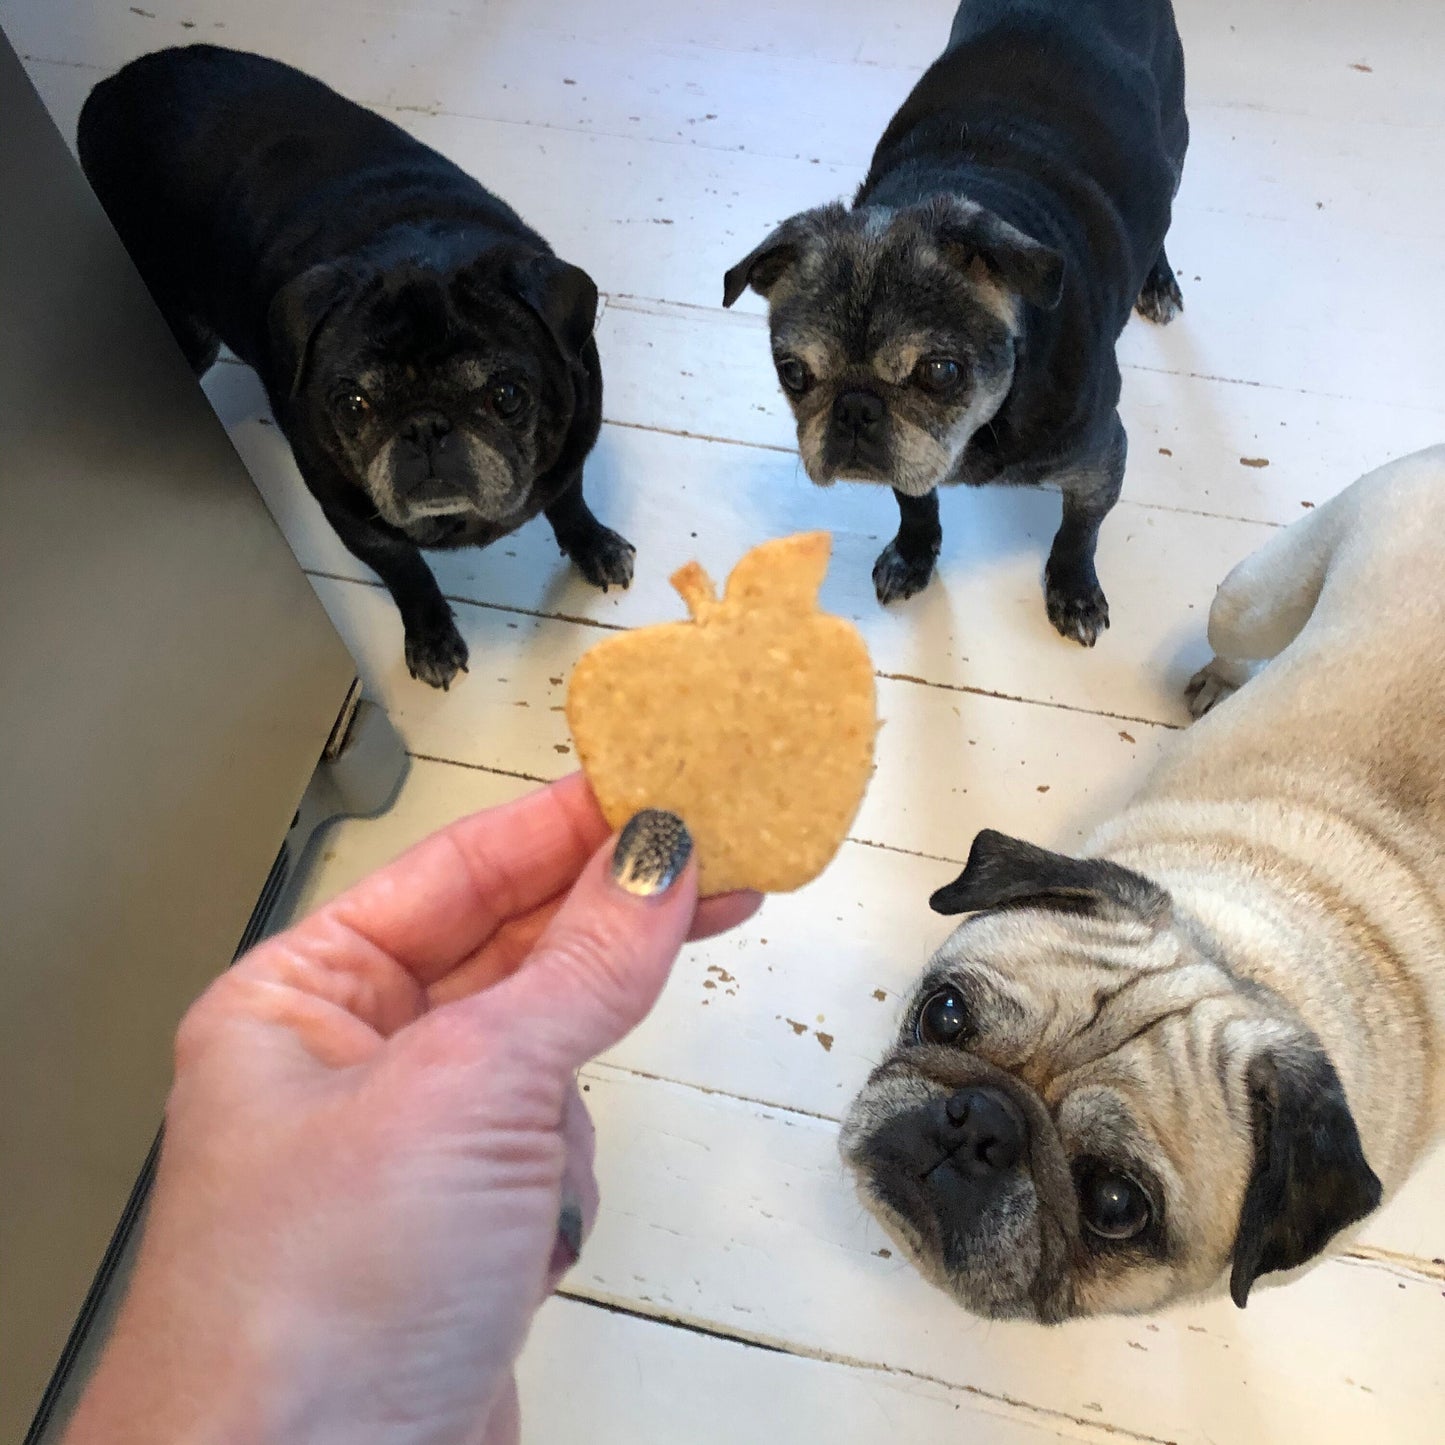 APPLE JACK Apple Cheddar Dog Treats Homemade Limited Ingredient Natural Wheat Free - A Portion of Proceeds Go To Pet Rescue